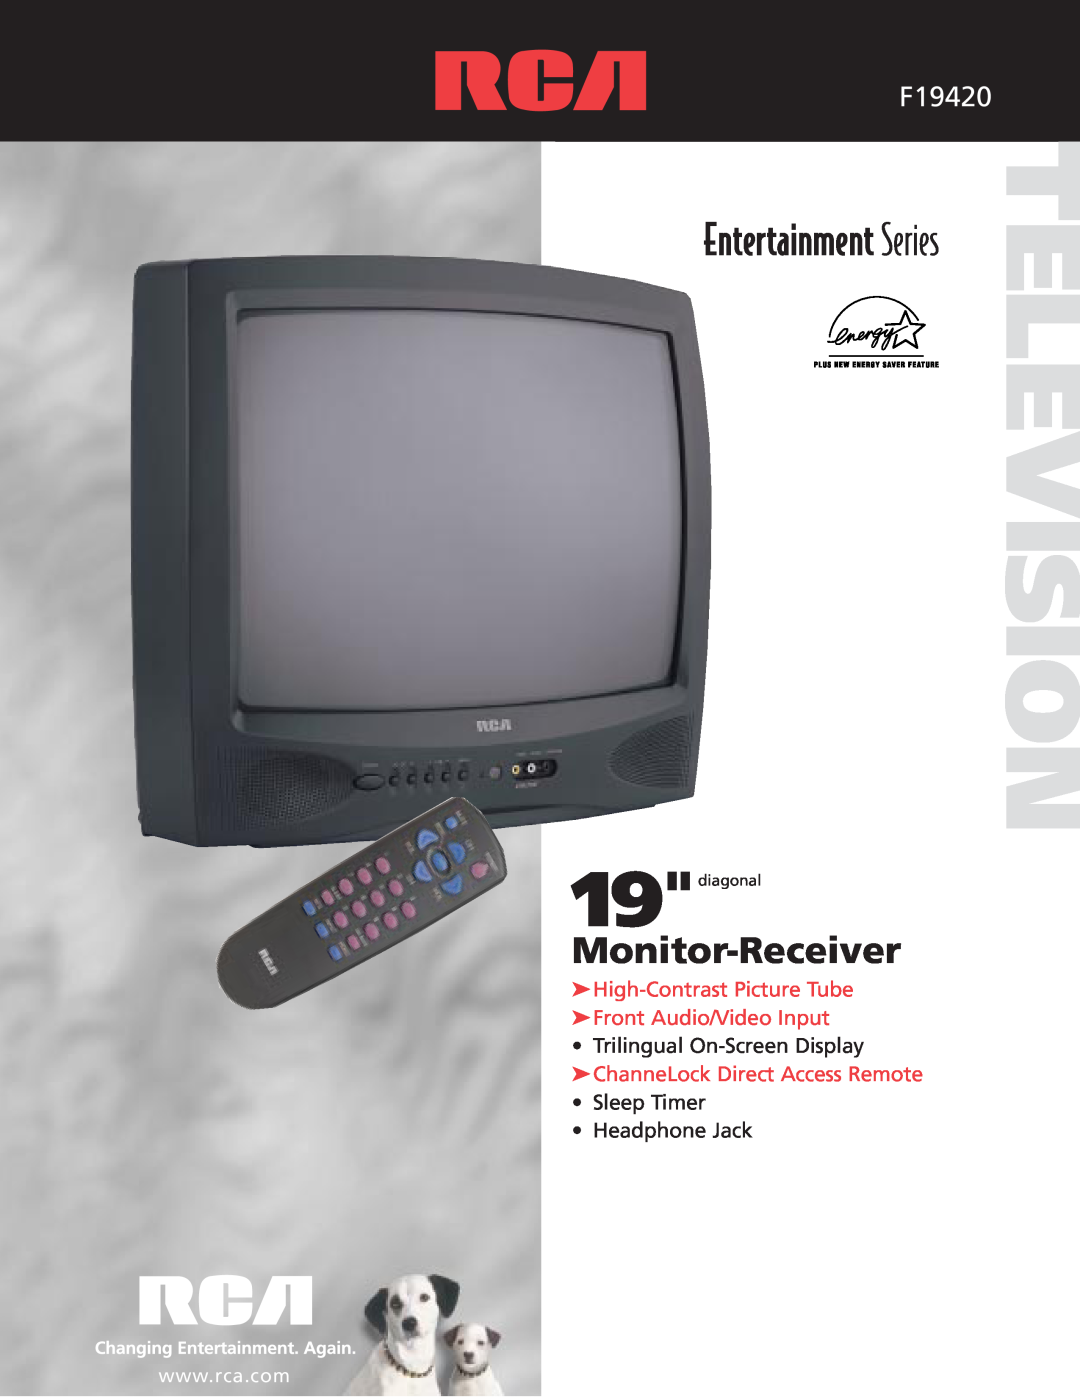 RCA F19420 manual Television, Monitor-Receiver, High-Contrast Picture Tube Front Audio/Video Input, 19diagonal 